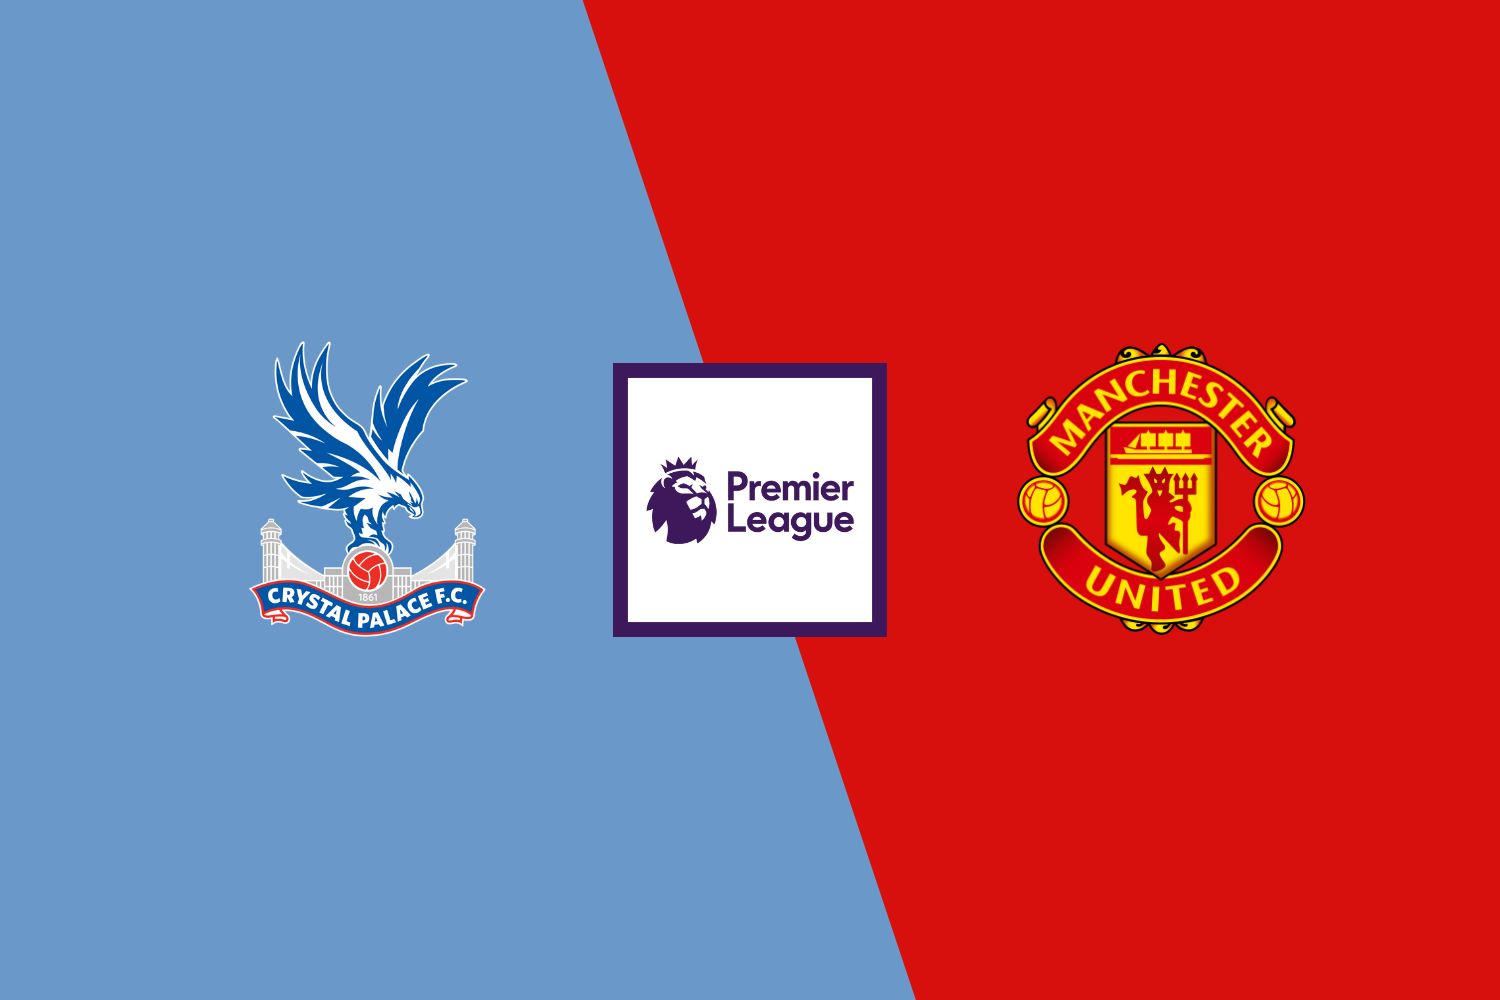 Crystal Palace vs Manchester United preview & prediction